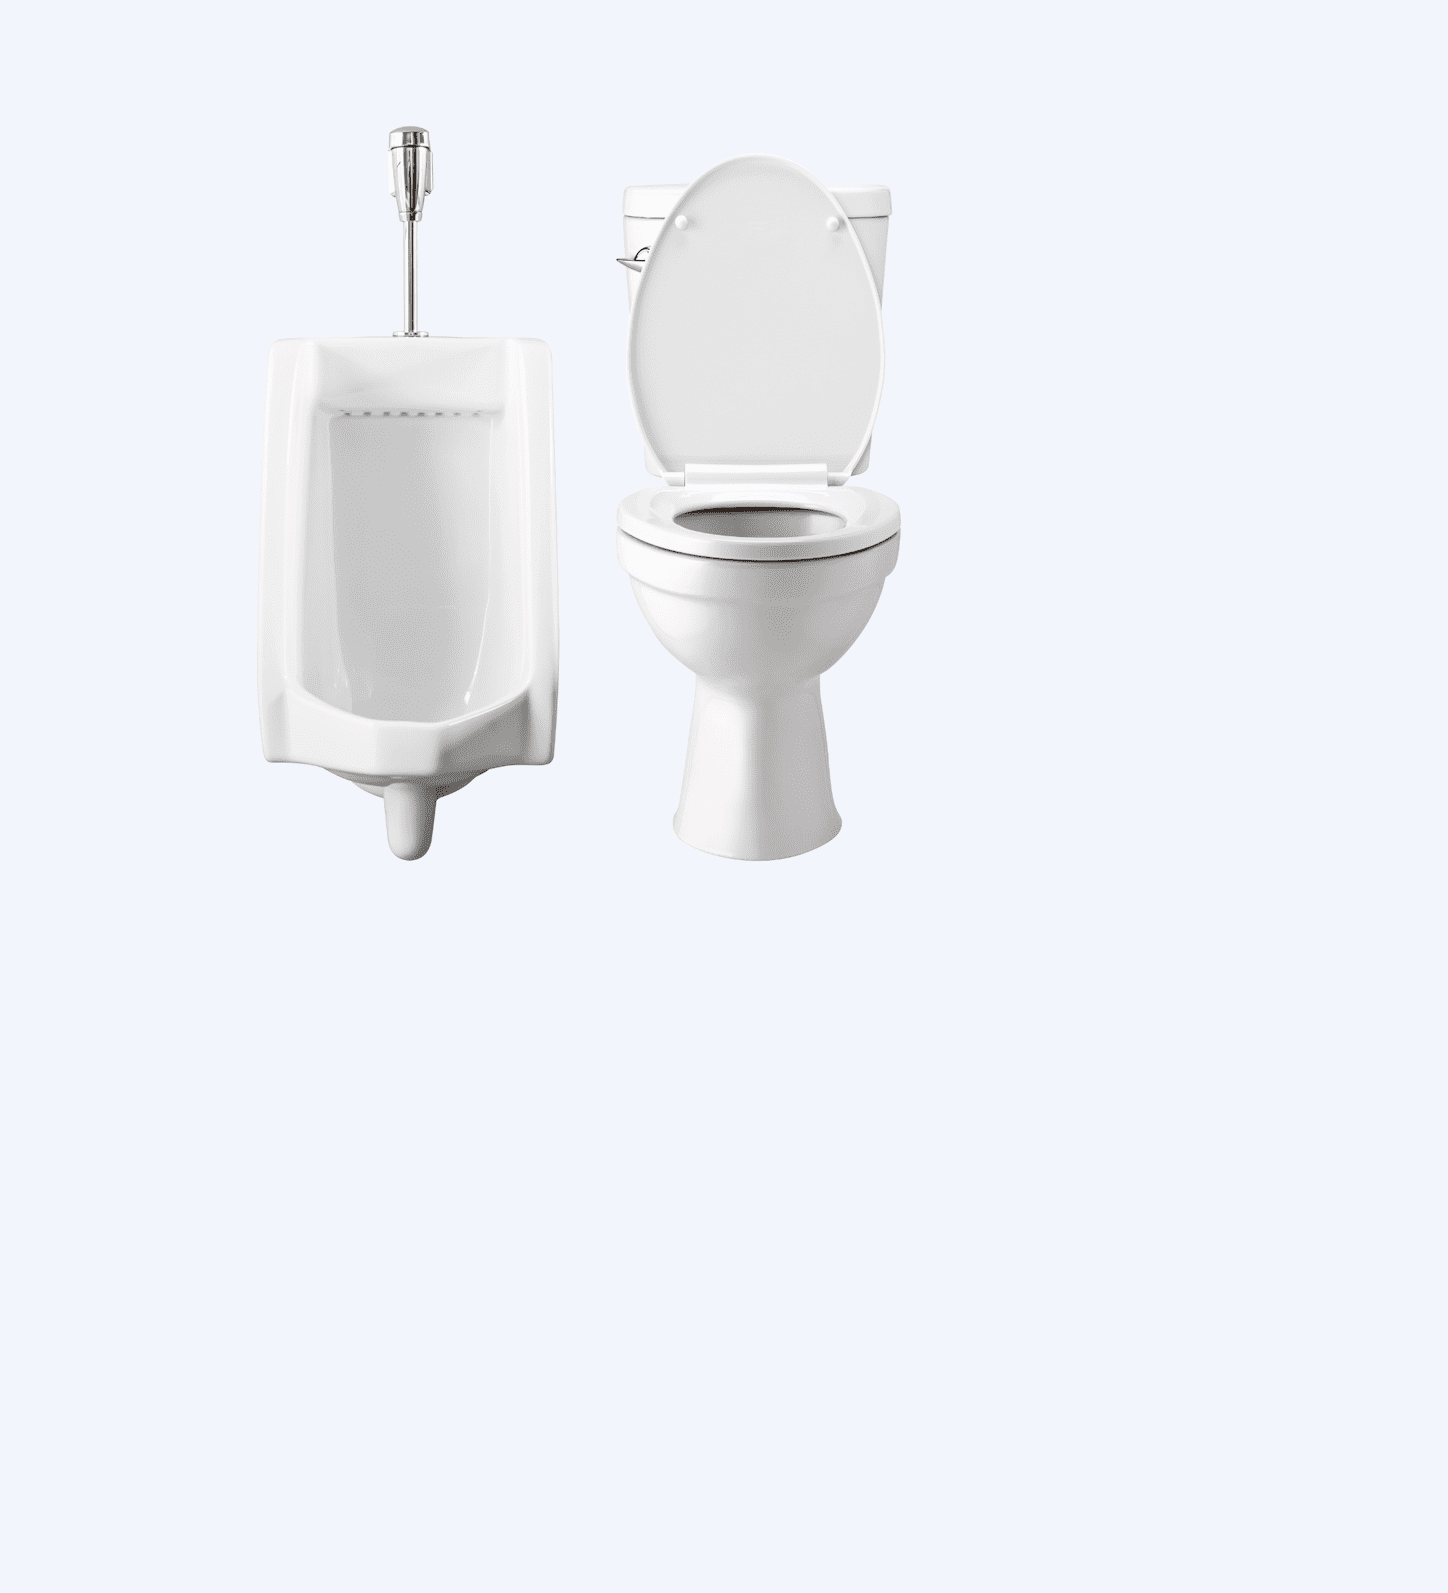 toilet and urinal